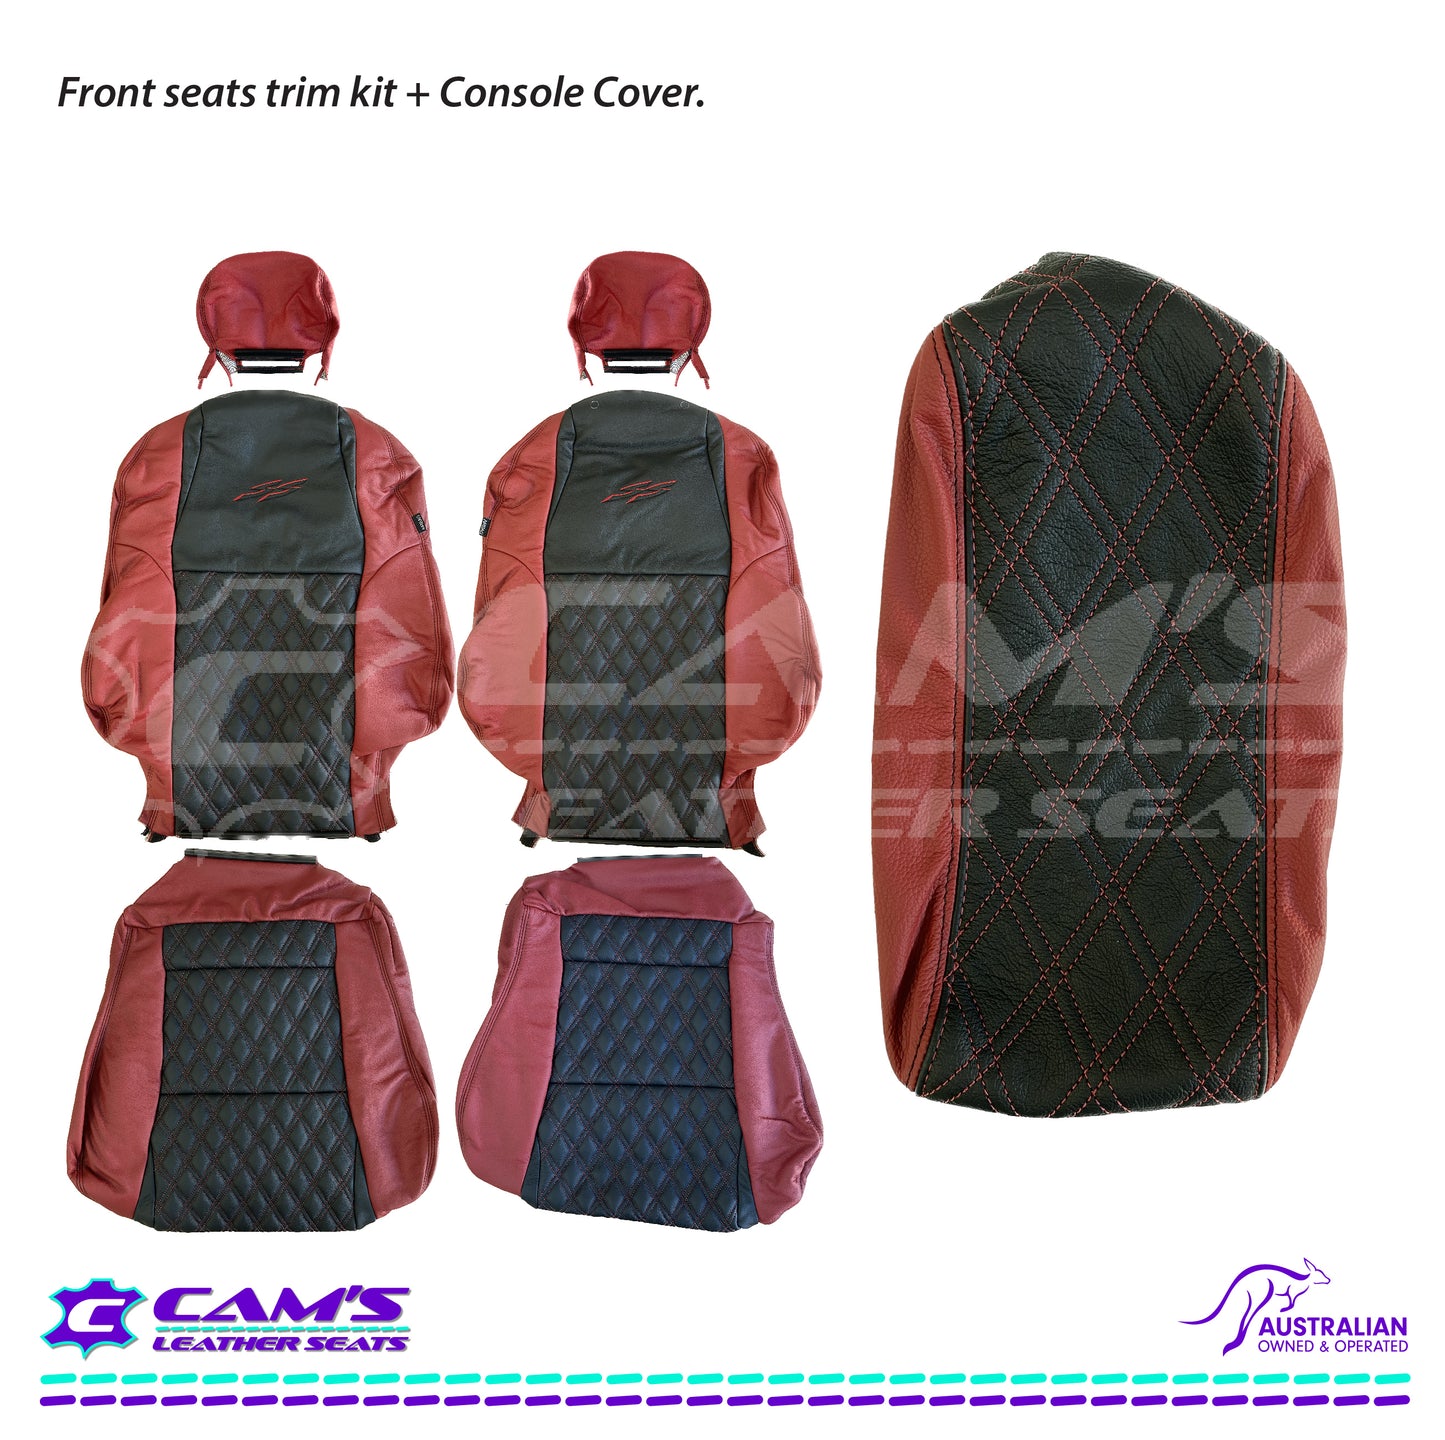 LEATHER SEATS TRIM KIT FOR VY/VZ SS UTE 2 FRONT SEATS RED/BLACK DIAMOND STITCH